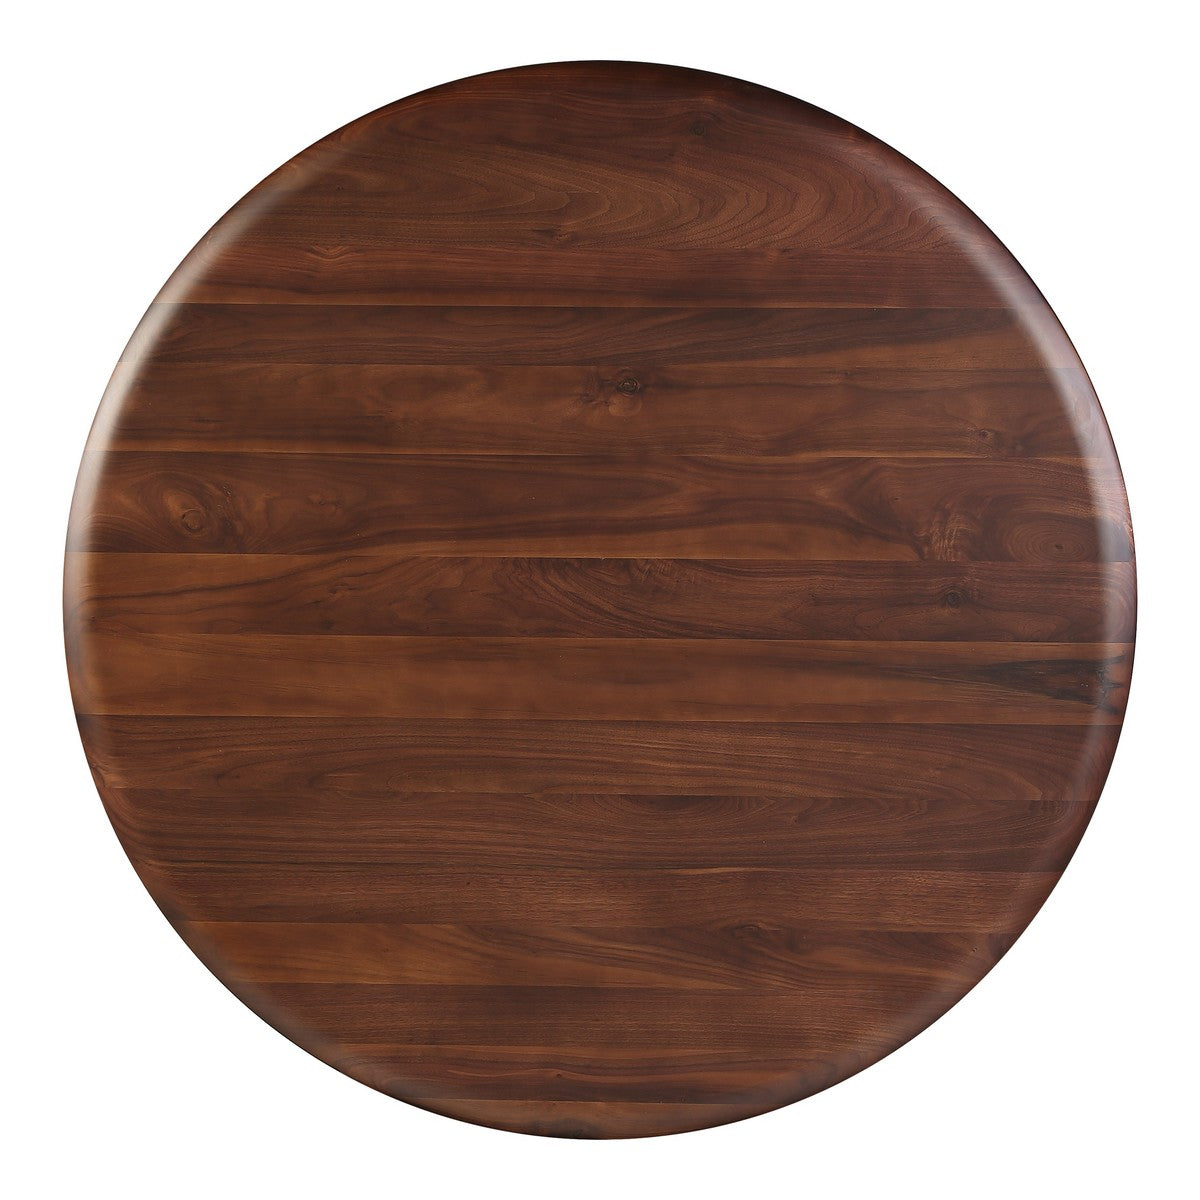 Moe's Home Collection Malibu Round Dining Table Walnut - BC-1047-03